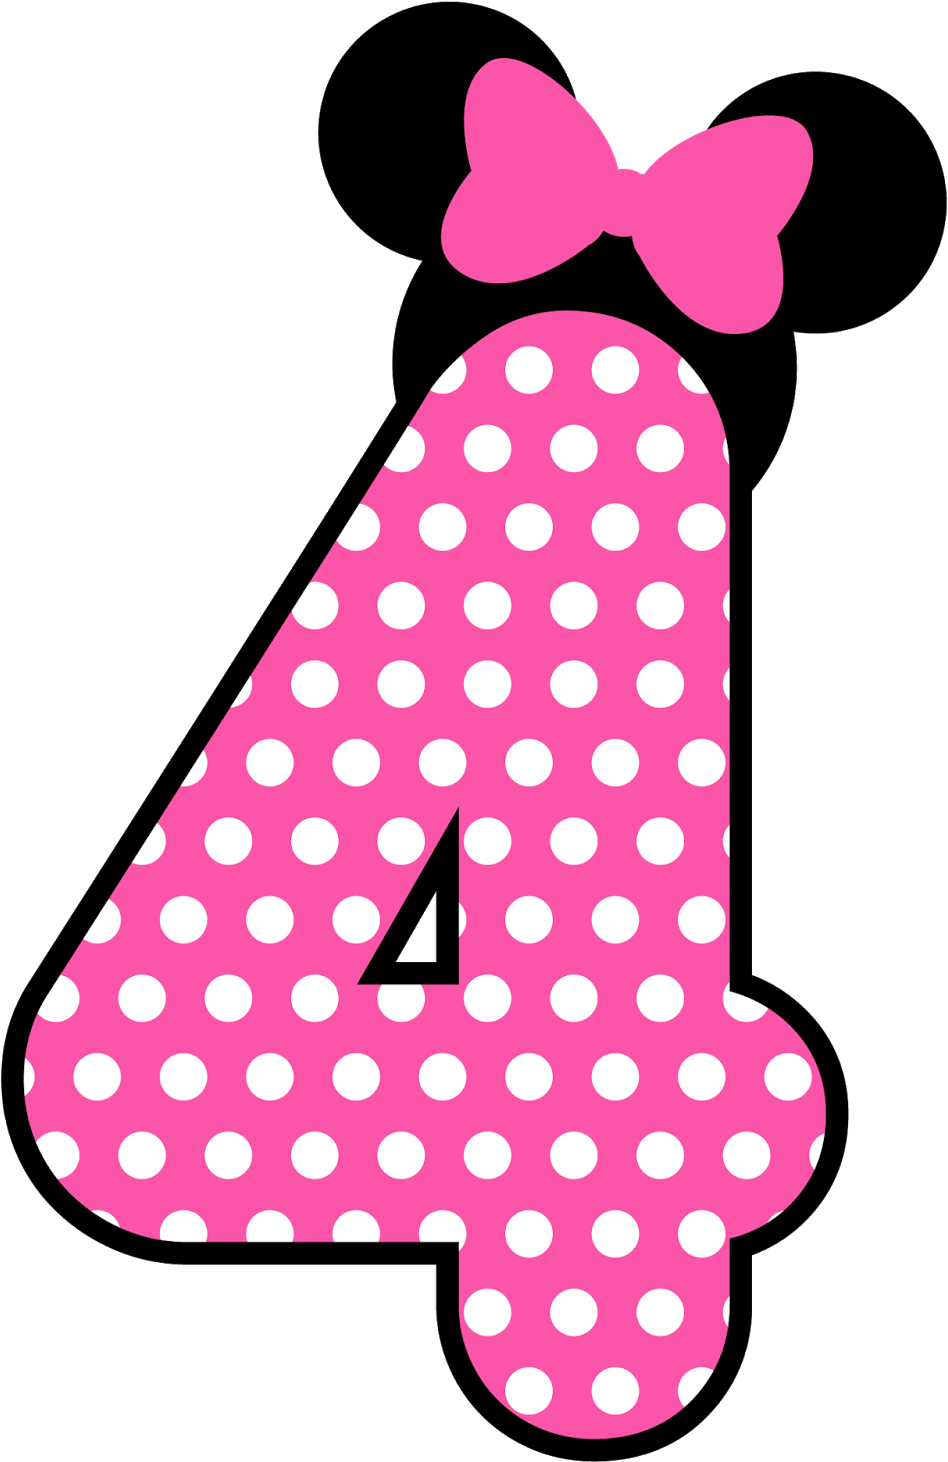 A Pink Number With White Dots PNG